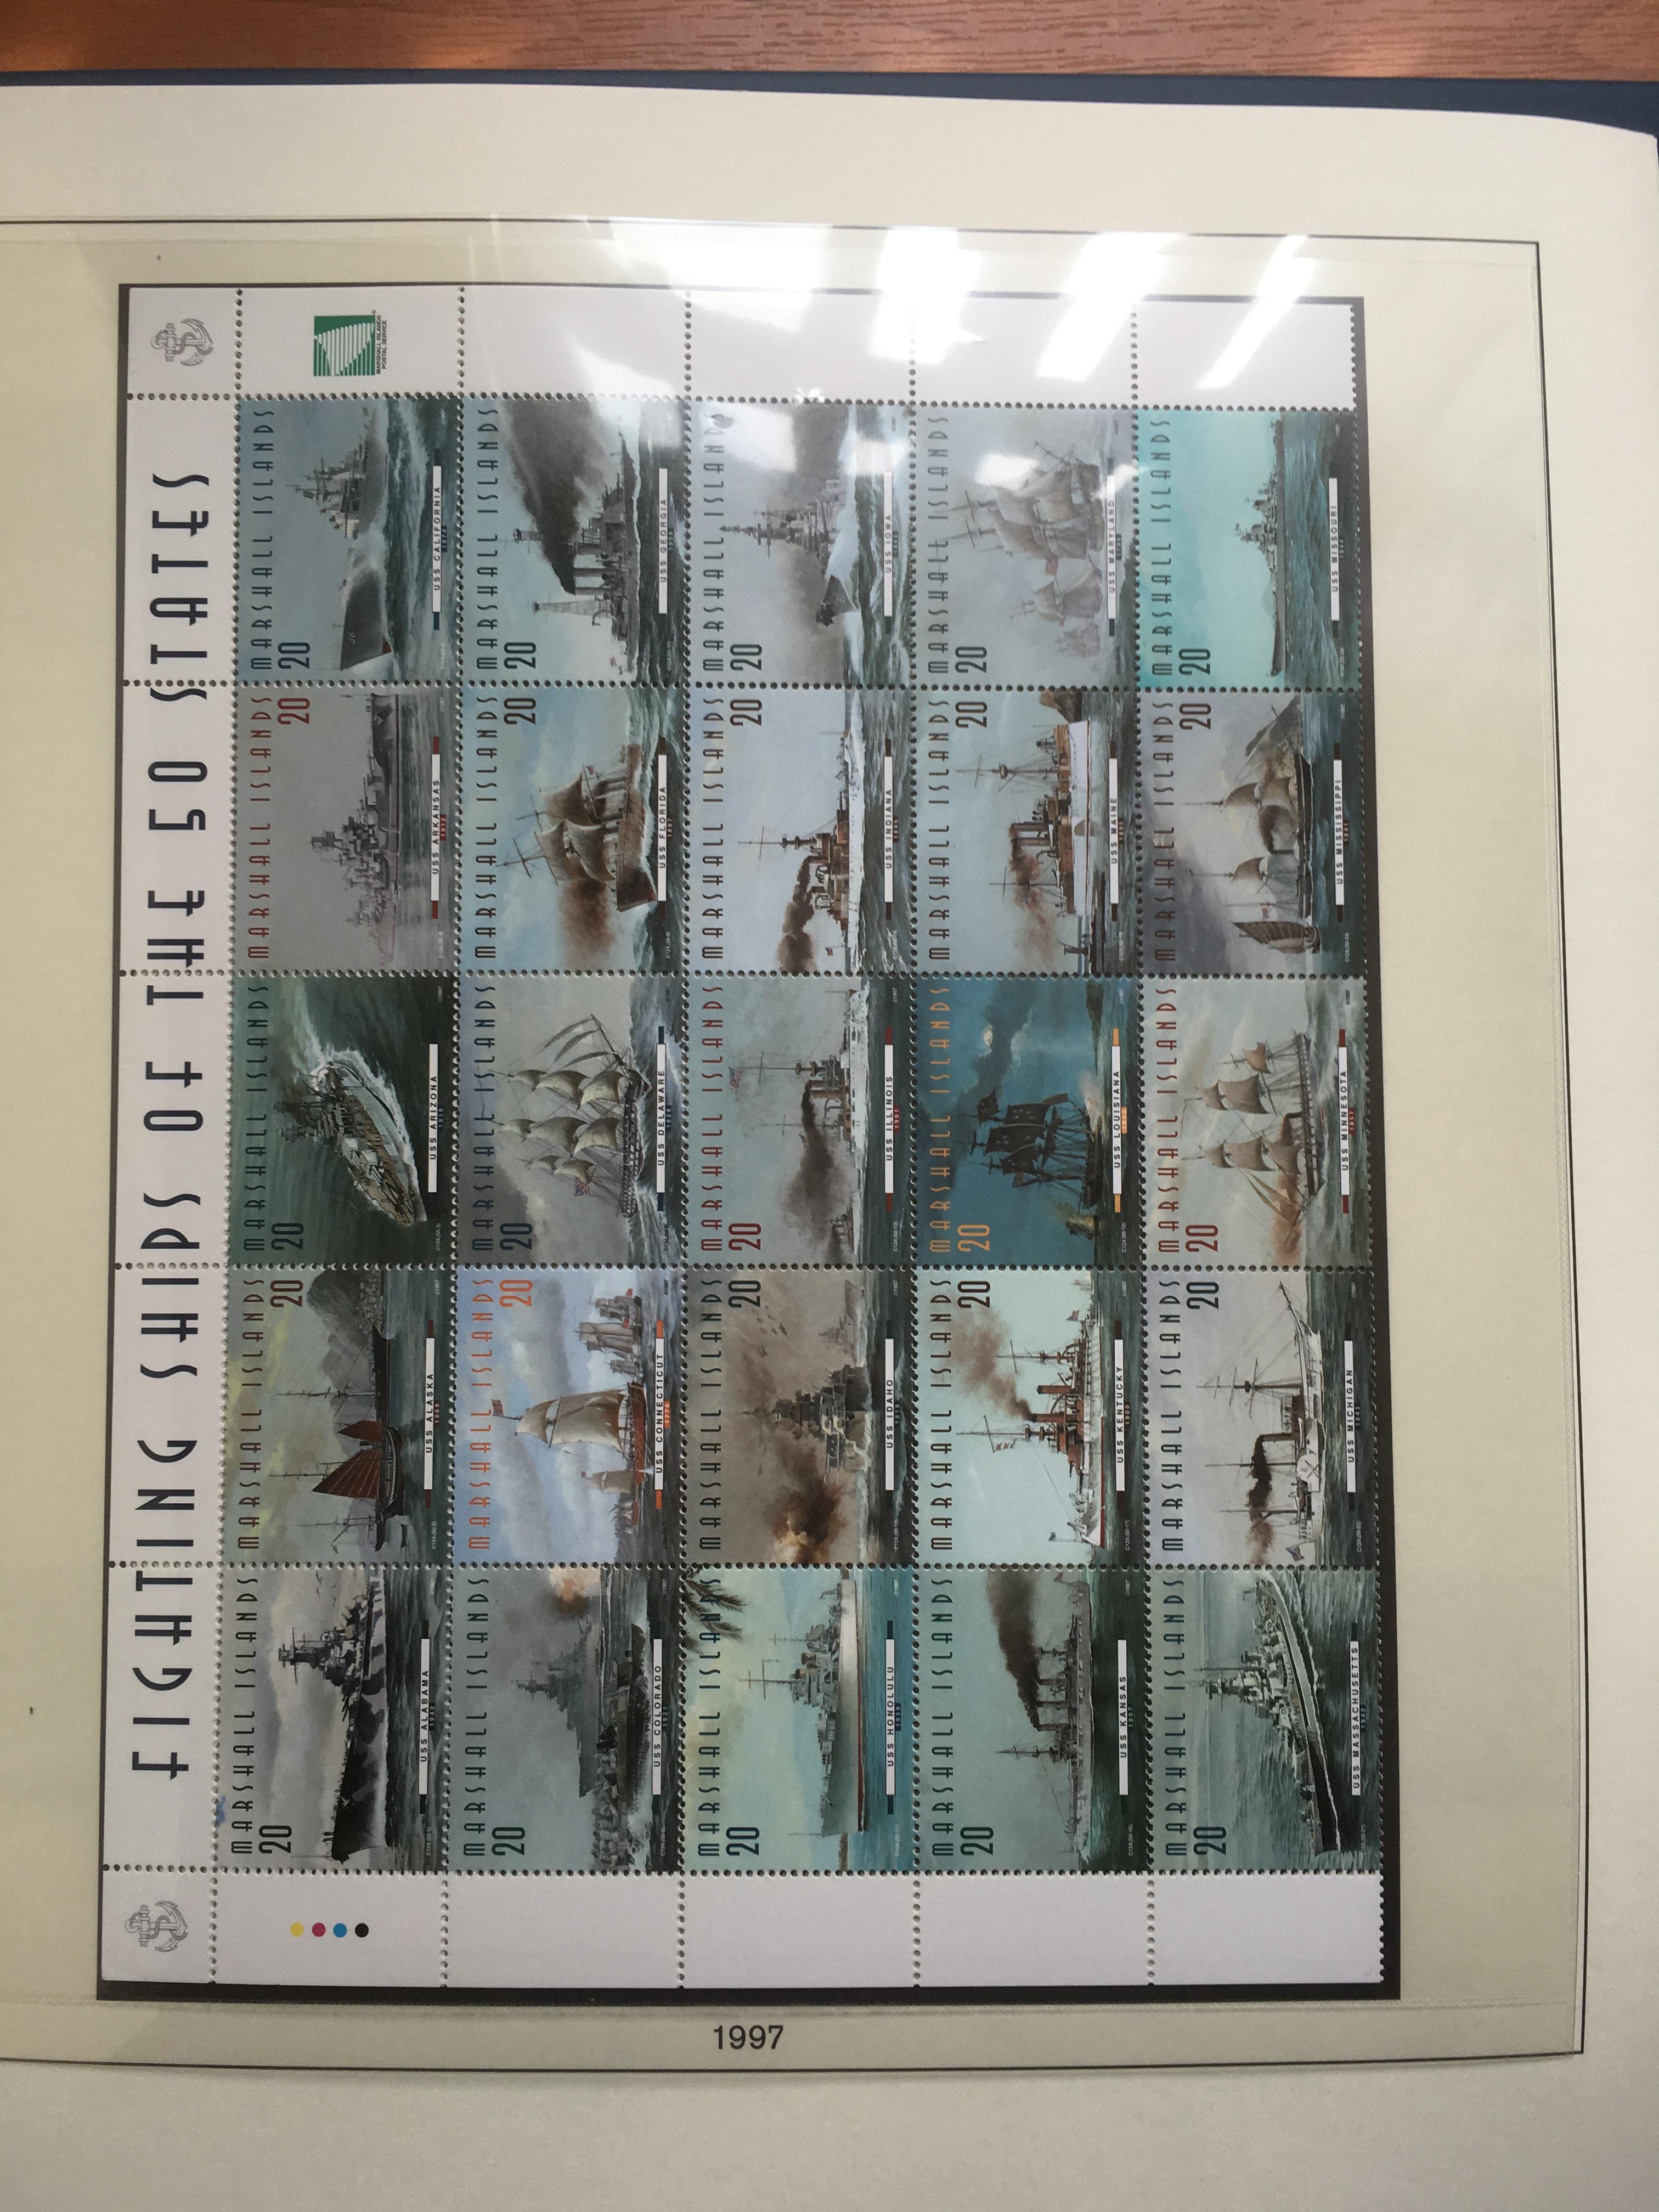 MARSHALL ISLANDS: 1994-9 MNH COLLECTION IN LINDER HINGELESS ALBUM AND ANOTHER SIMILAR ALBUM WITH - Image 14 of 16